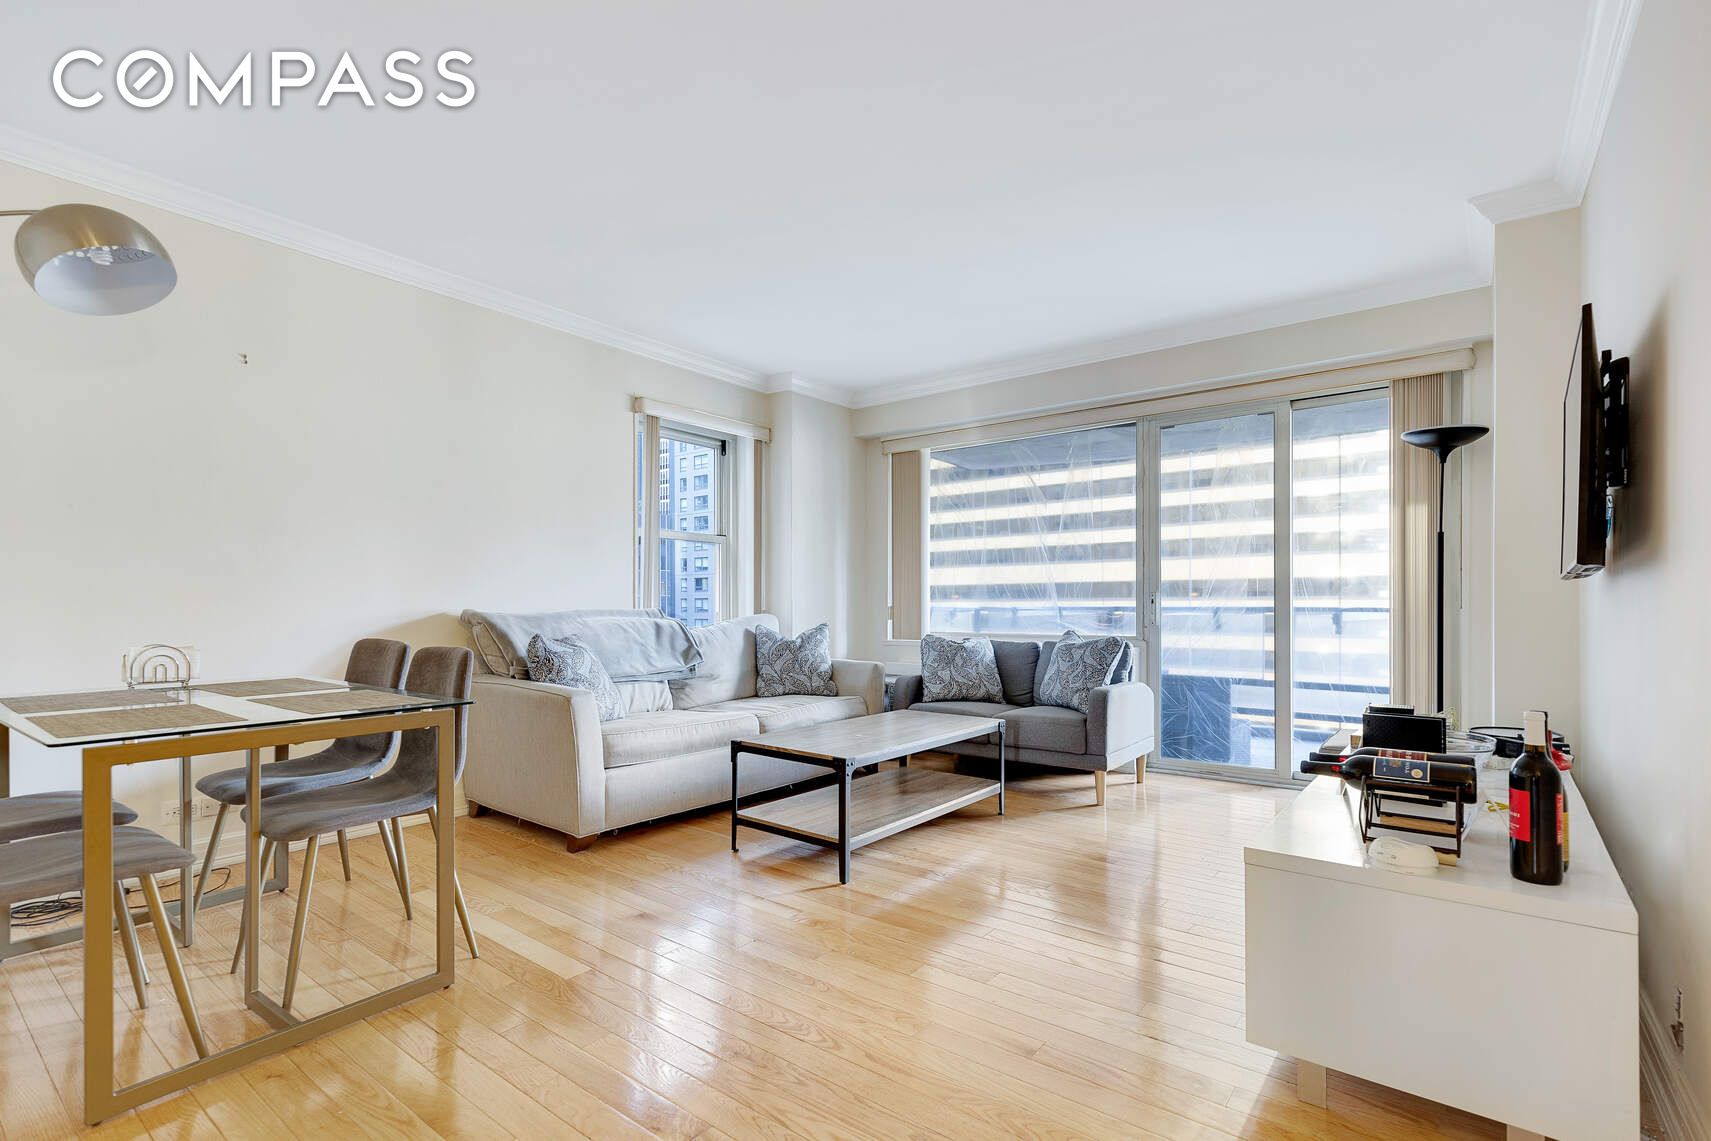 159 West 53rd Street 18Ab, Theater District, Midtown West, NYC - 3 Bedrooms  
2.5 Bathrooms  
6 Rooms - 